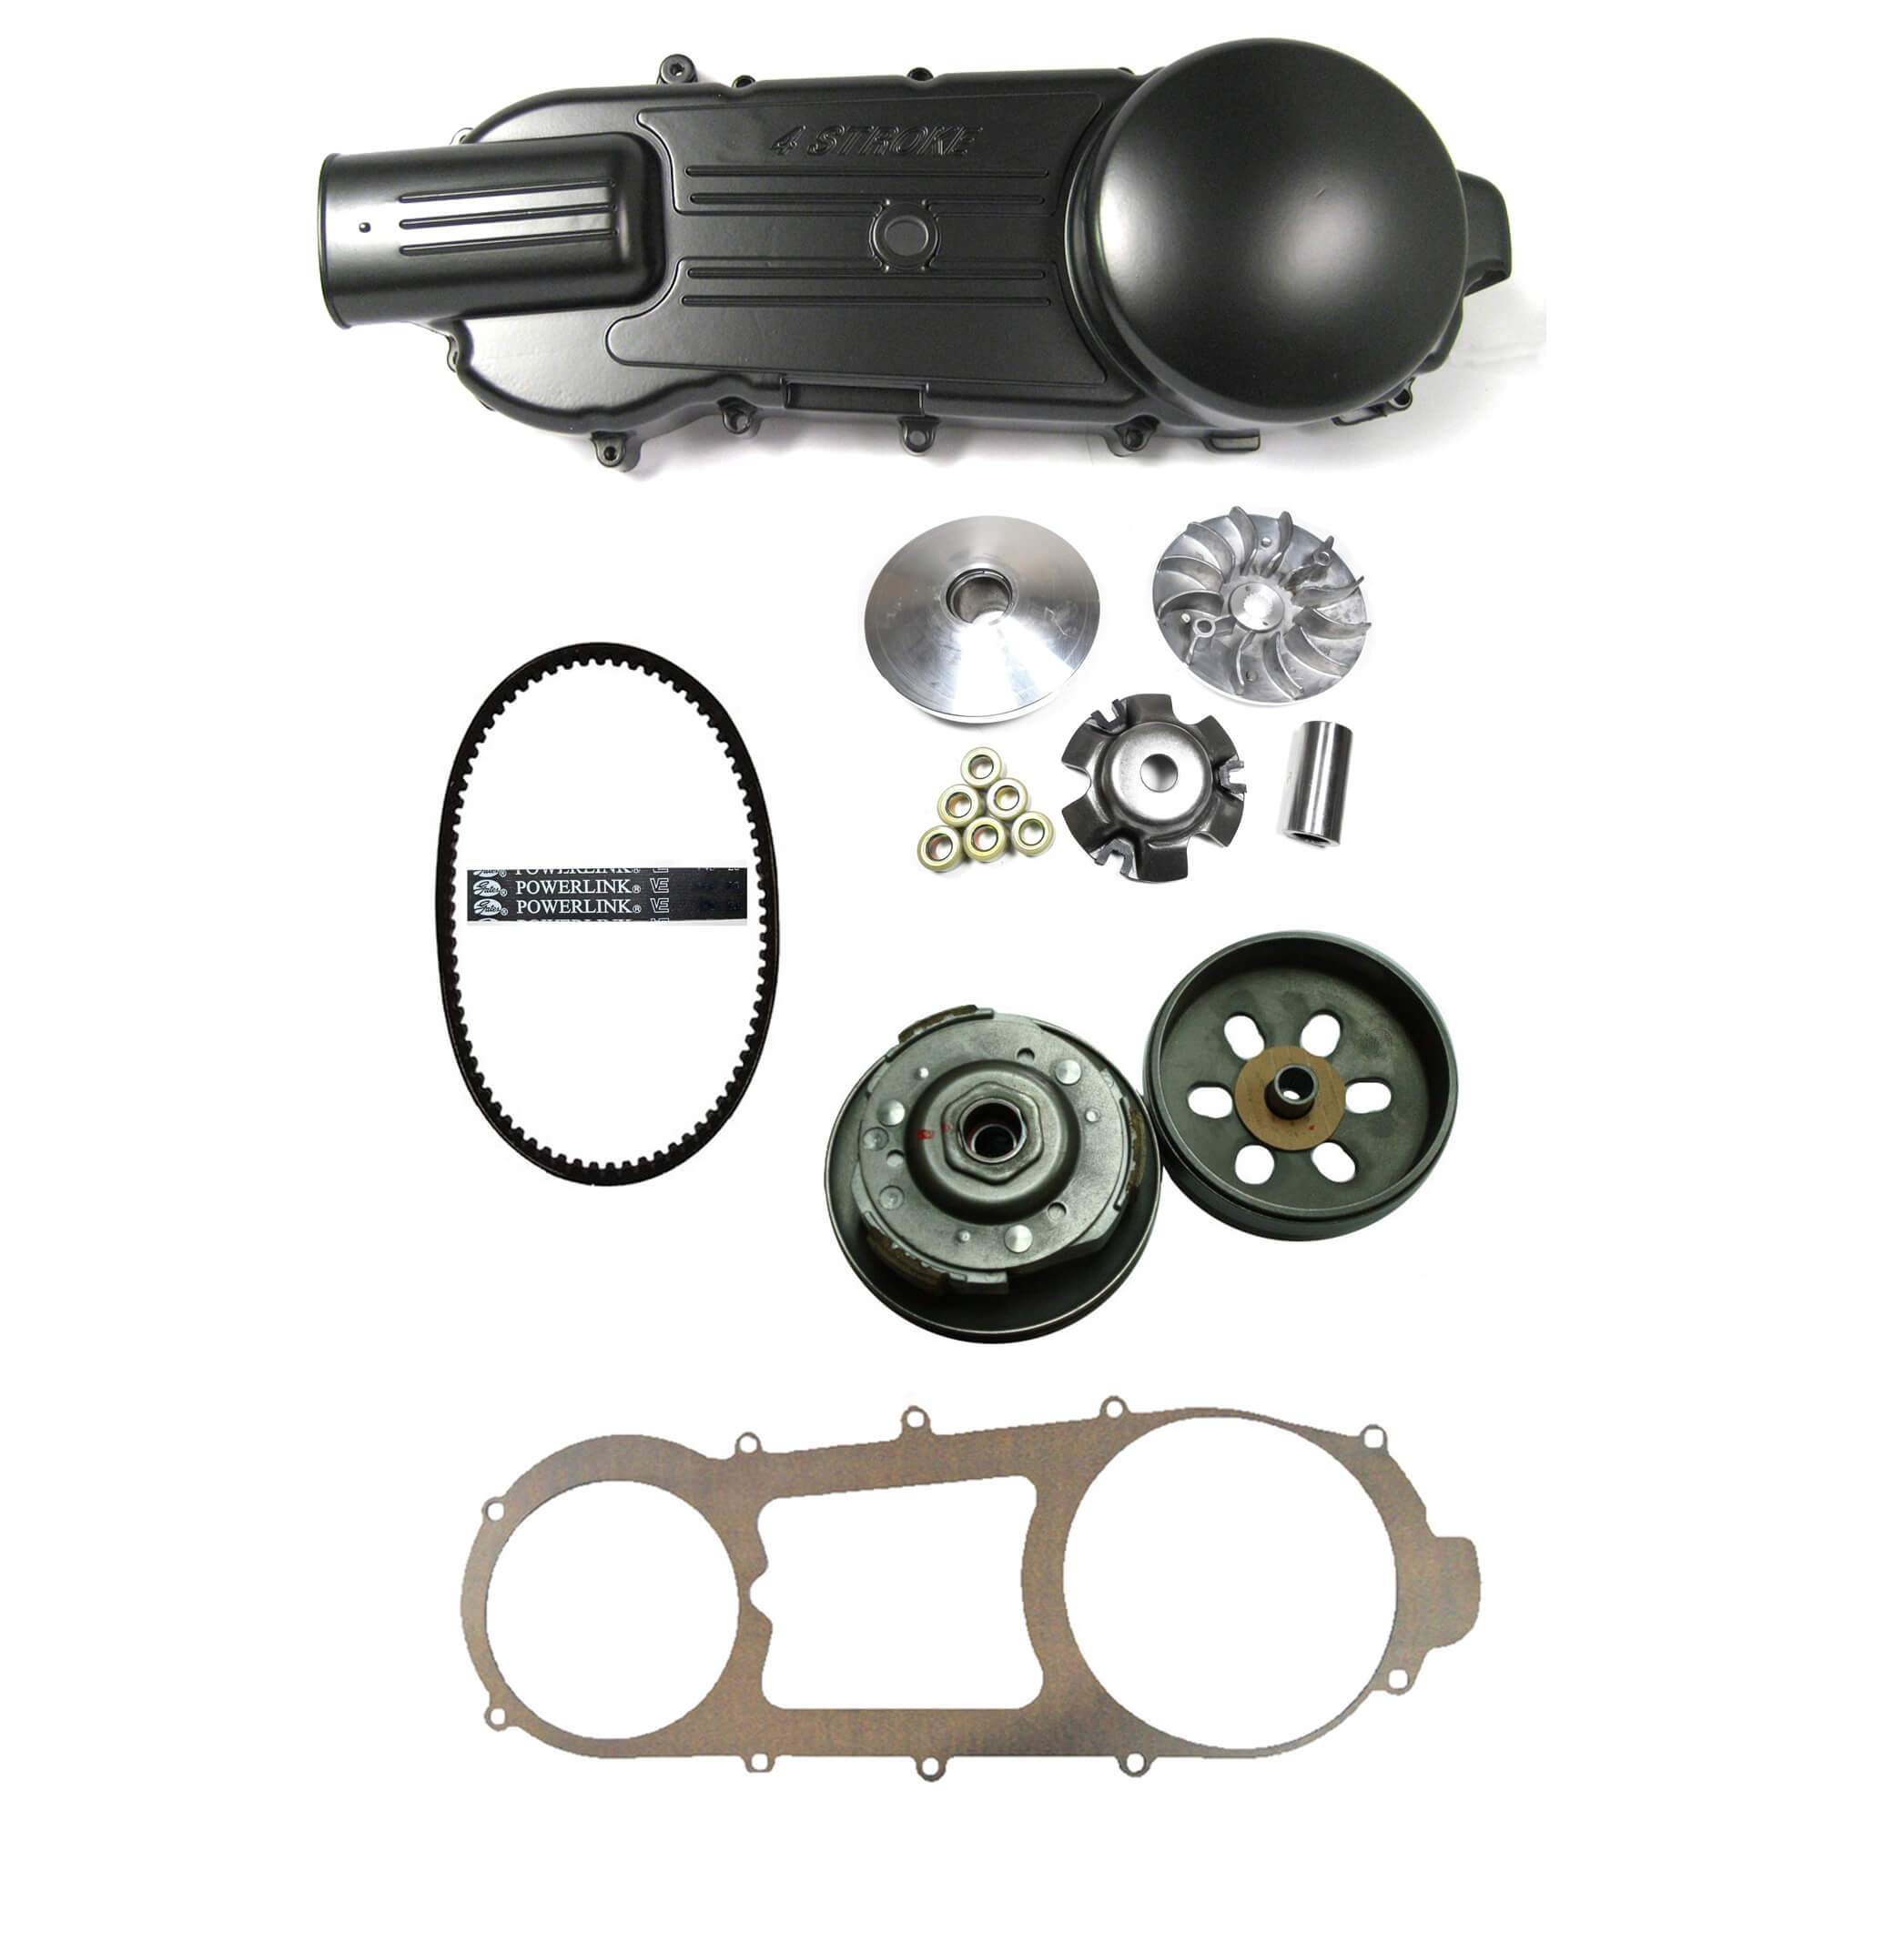 GY6-150 (150cc) Long Case Crankcase Cover, Clutch & Belt Kit Includes: LH Crankcase Cover (Black), Front Clutch Variator, Rear Clutch Pulley, Powerlink Drive Belt & Belt Cover Gasket For Units With The 842x20x30 Belt - Click Image to Close